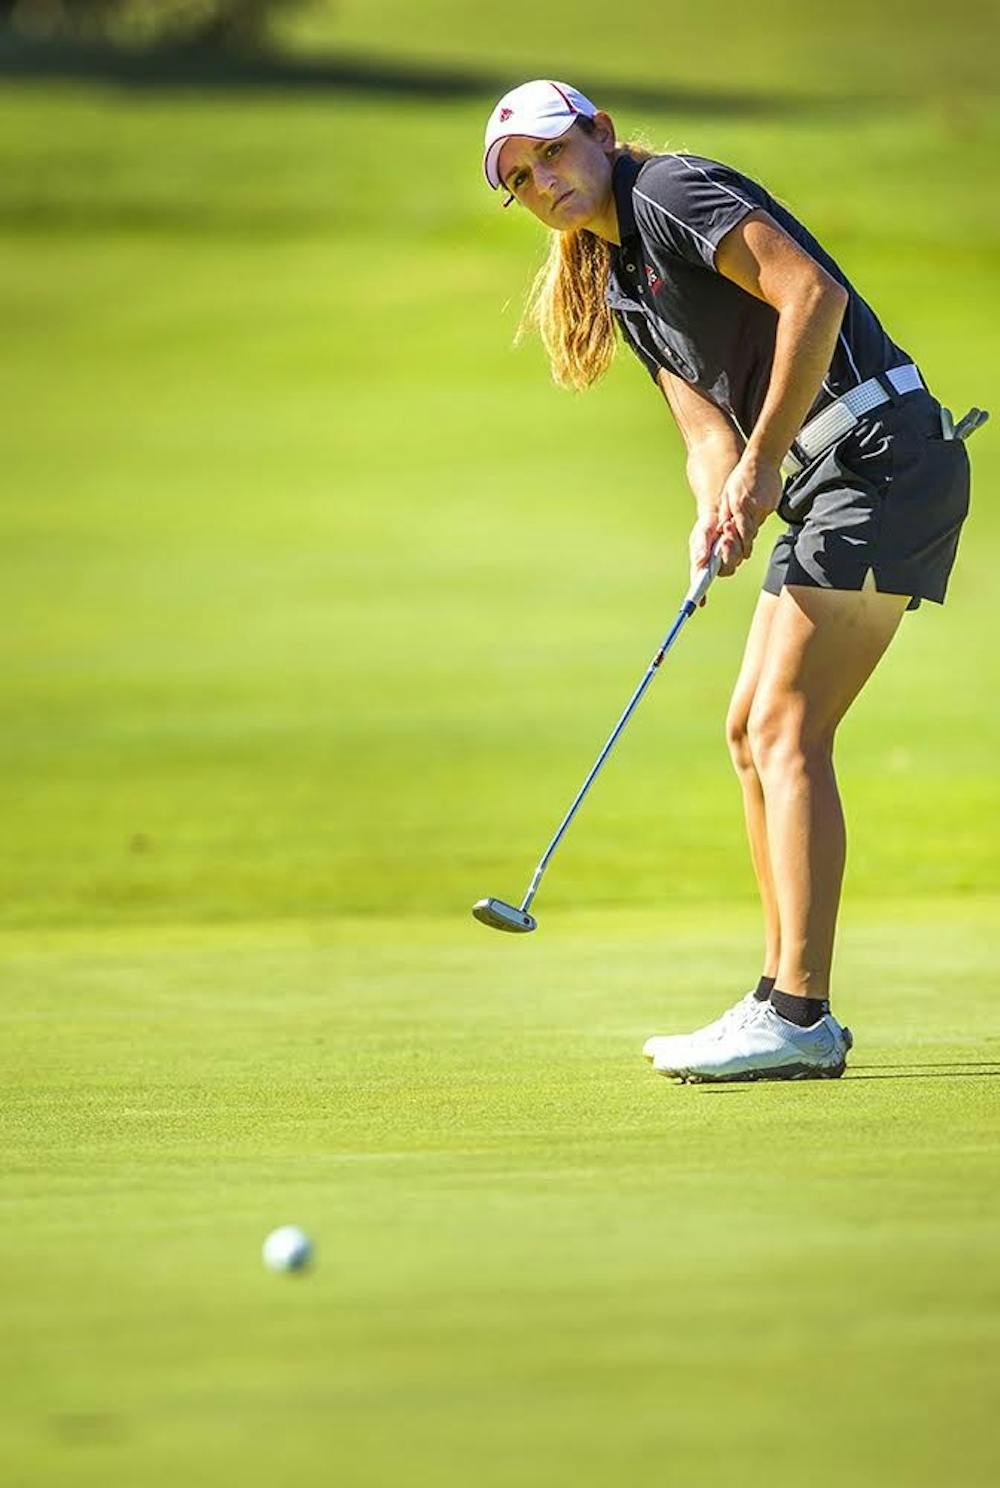 <p>Senior Allison Lindley led all individual statistics for the Ball State women's golf team and&nbsp;hopes to carry the momentum she built last season to this season. The golf&nbsp;team will head to Illinois State University this weekend to compete in the annual Redbird Invitational. <em>Ball State Athletics // Photo Provided&nbsp;</em></p>